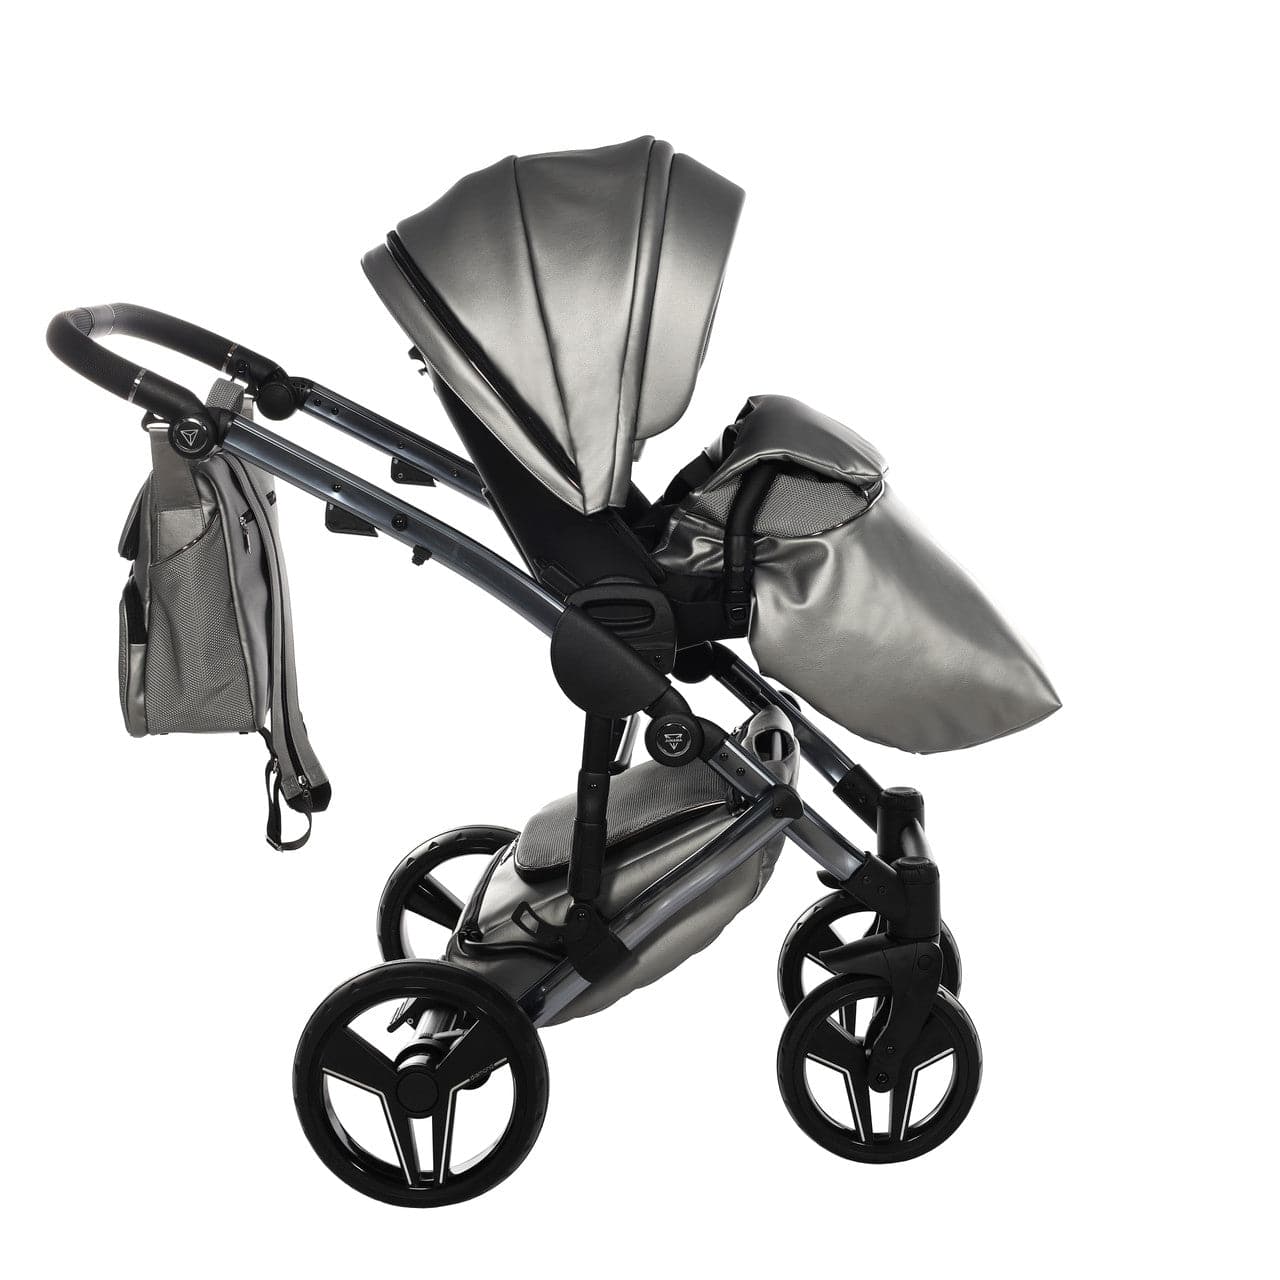 Junama S-Class 3 In 1 Travel System - Silver - For Your Little One